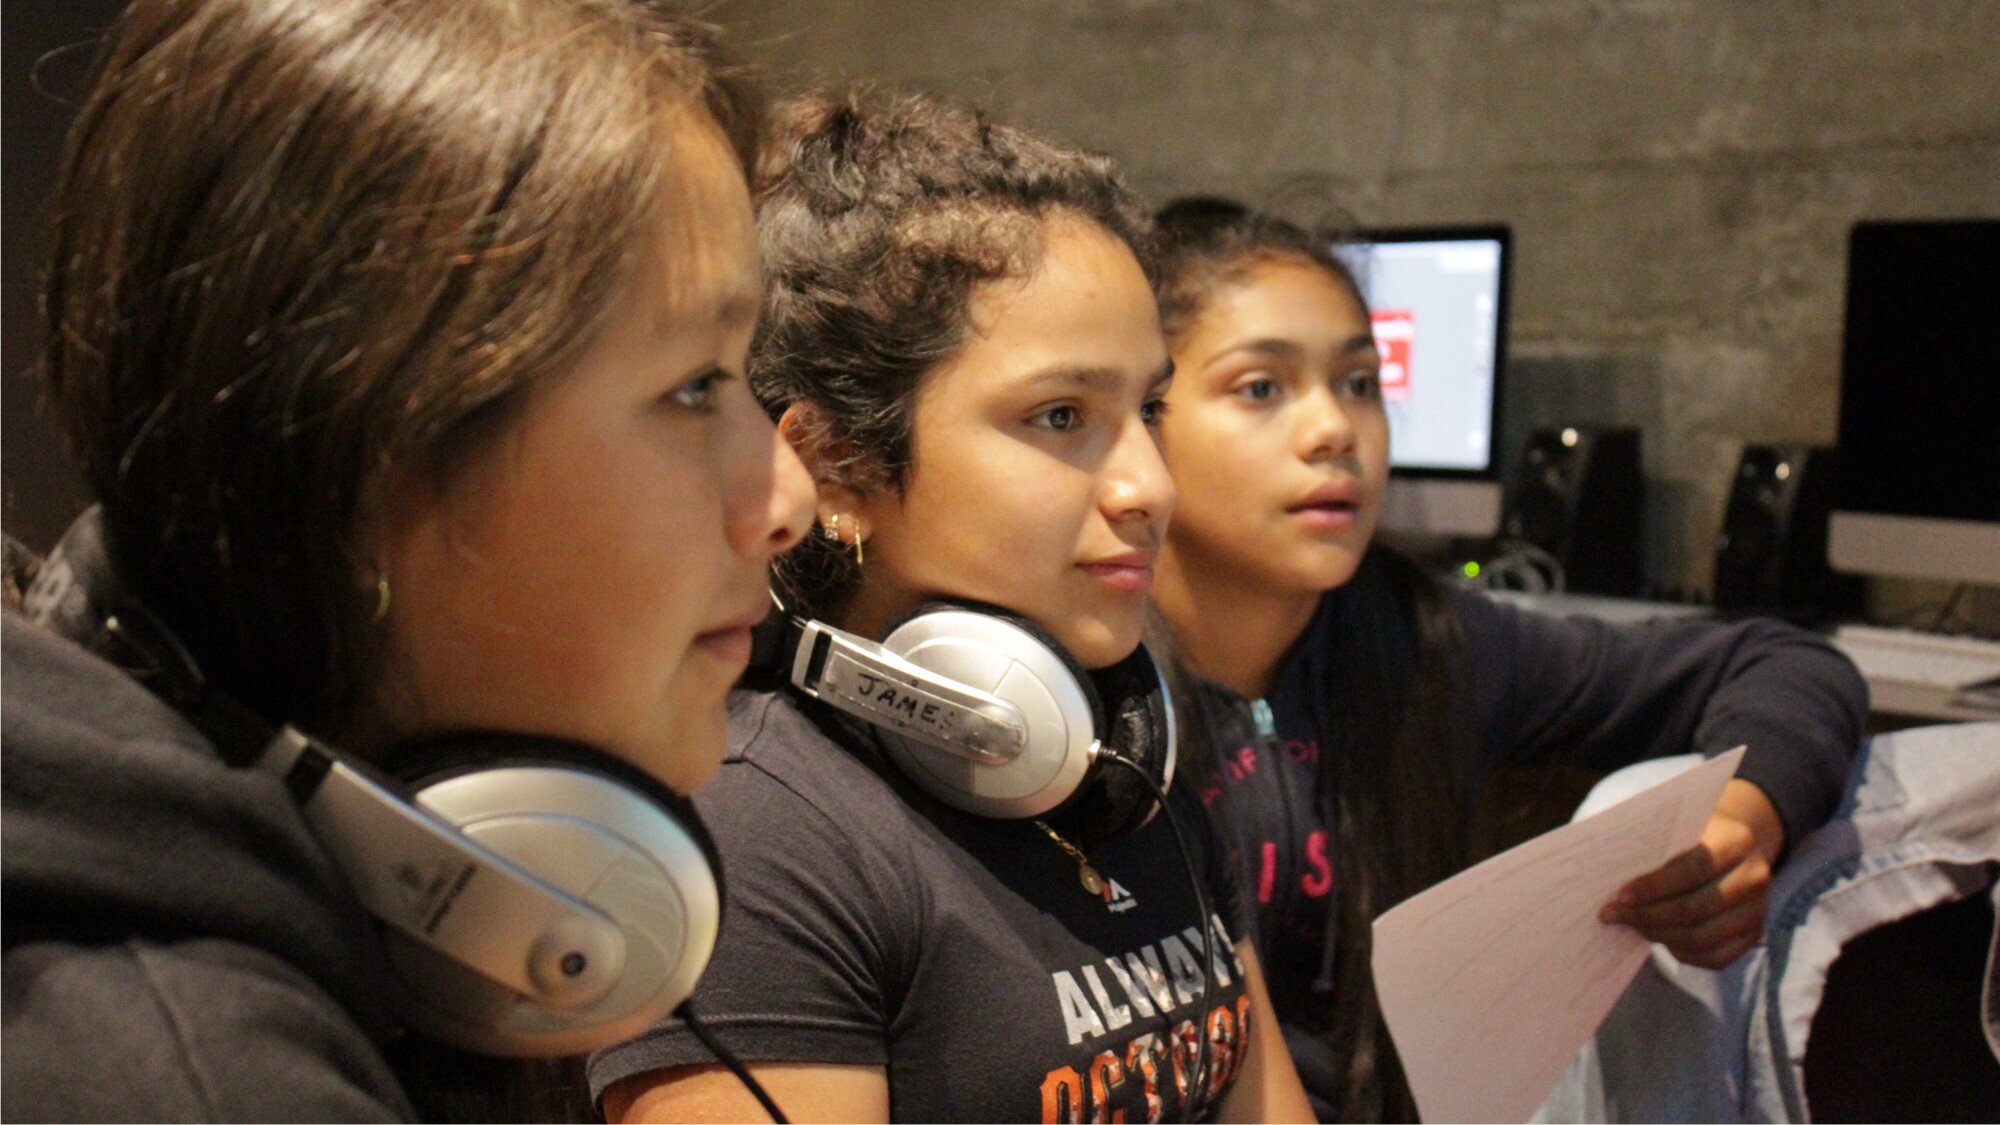 Girls on the Mic Students Learning_credit Womens Audio Mission.jpg